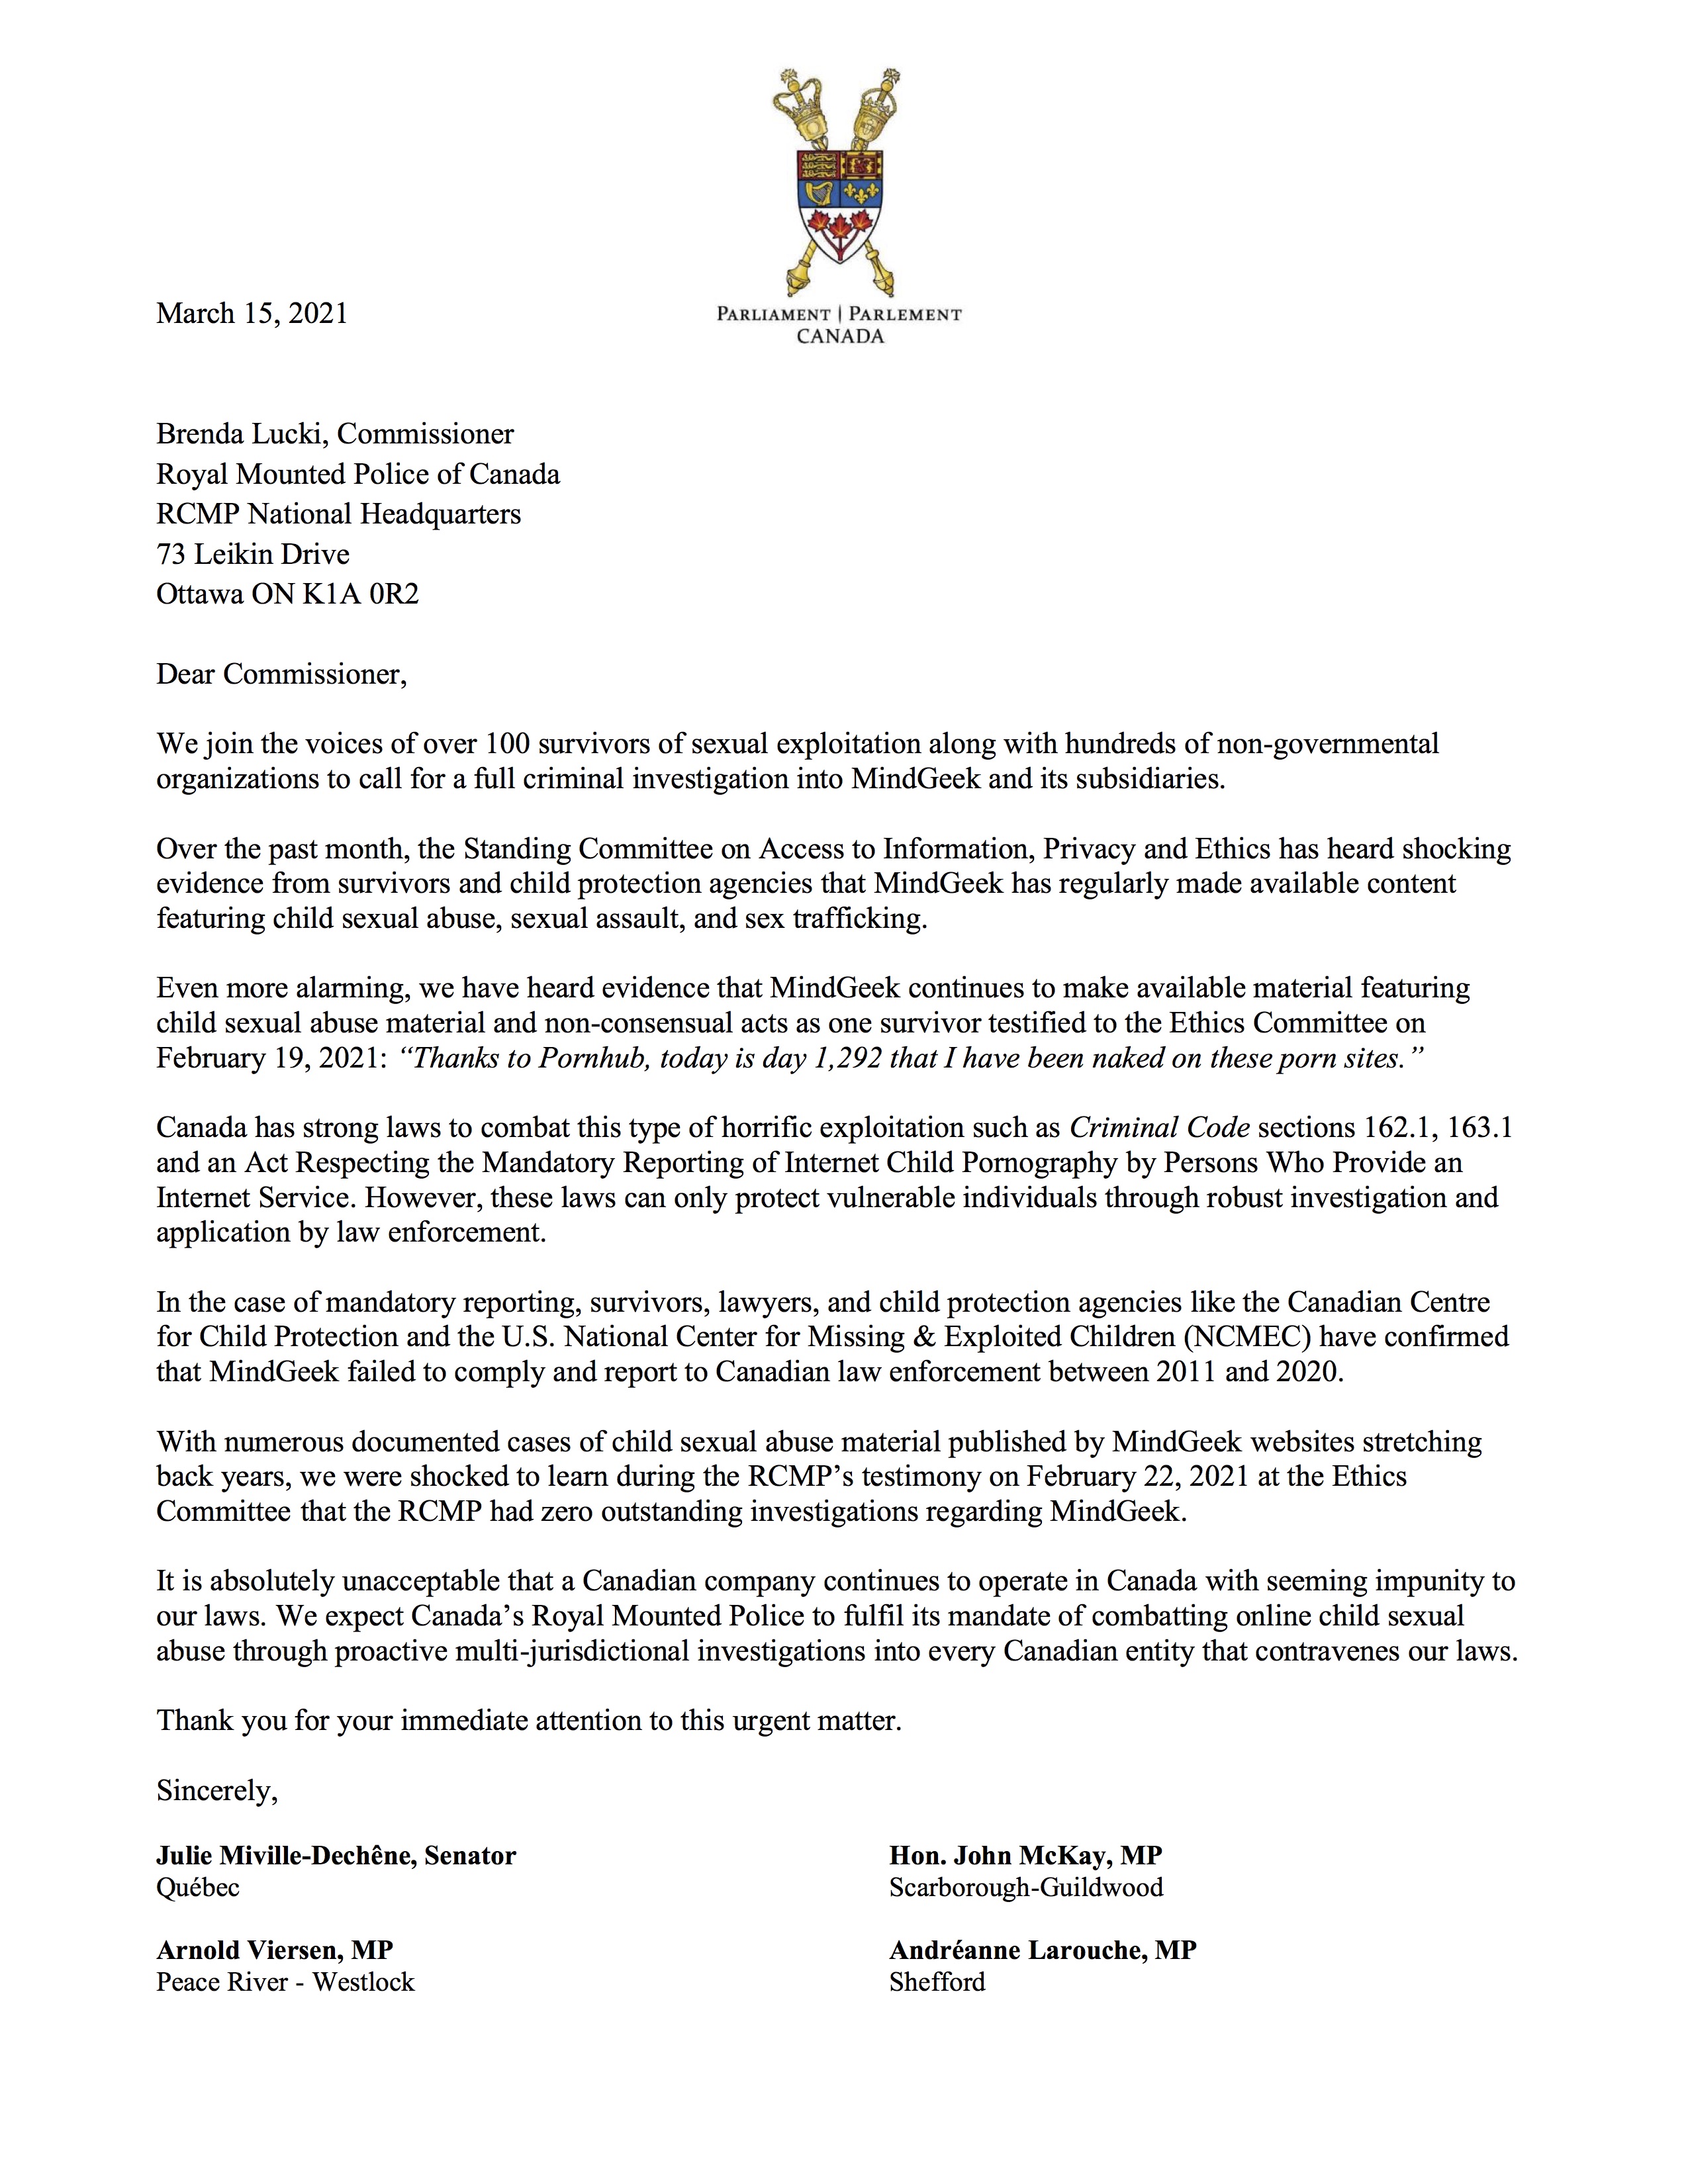 Letter to the RCMP Commissioner - English Page 1